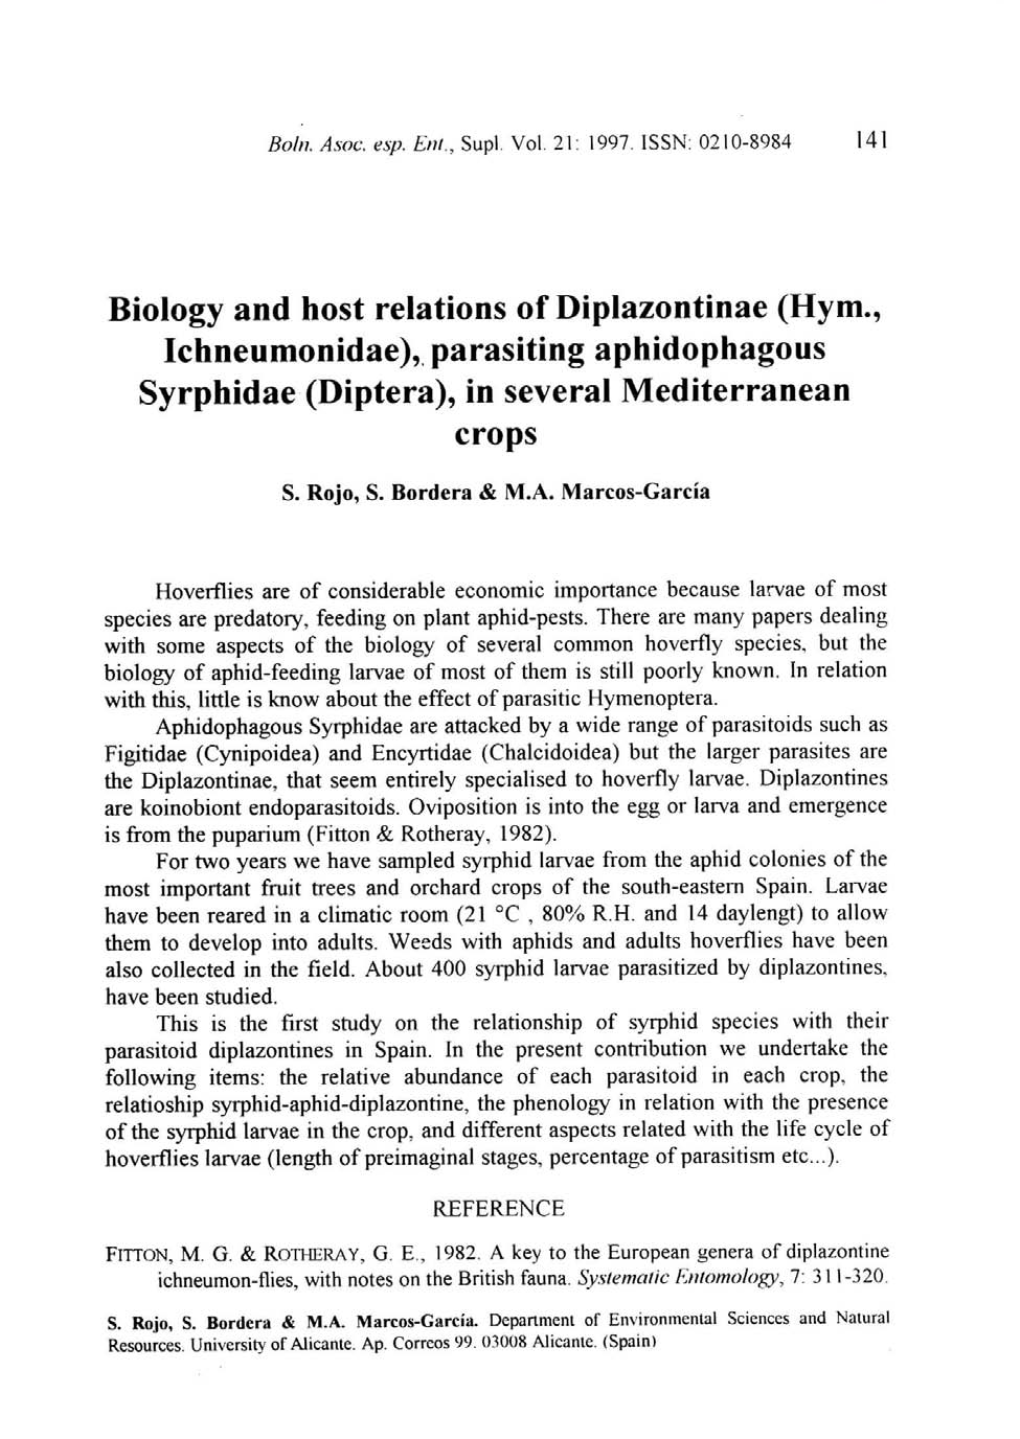 Biology and Host Relations of Diplazontinae (Hym., Ichneumonidae), Parasiting Aphidophagous Syrphidae (Díptera), in Several Mediterranean Crops